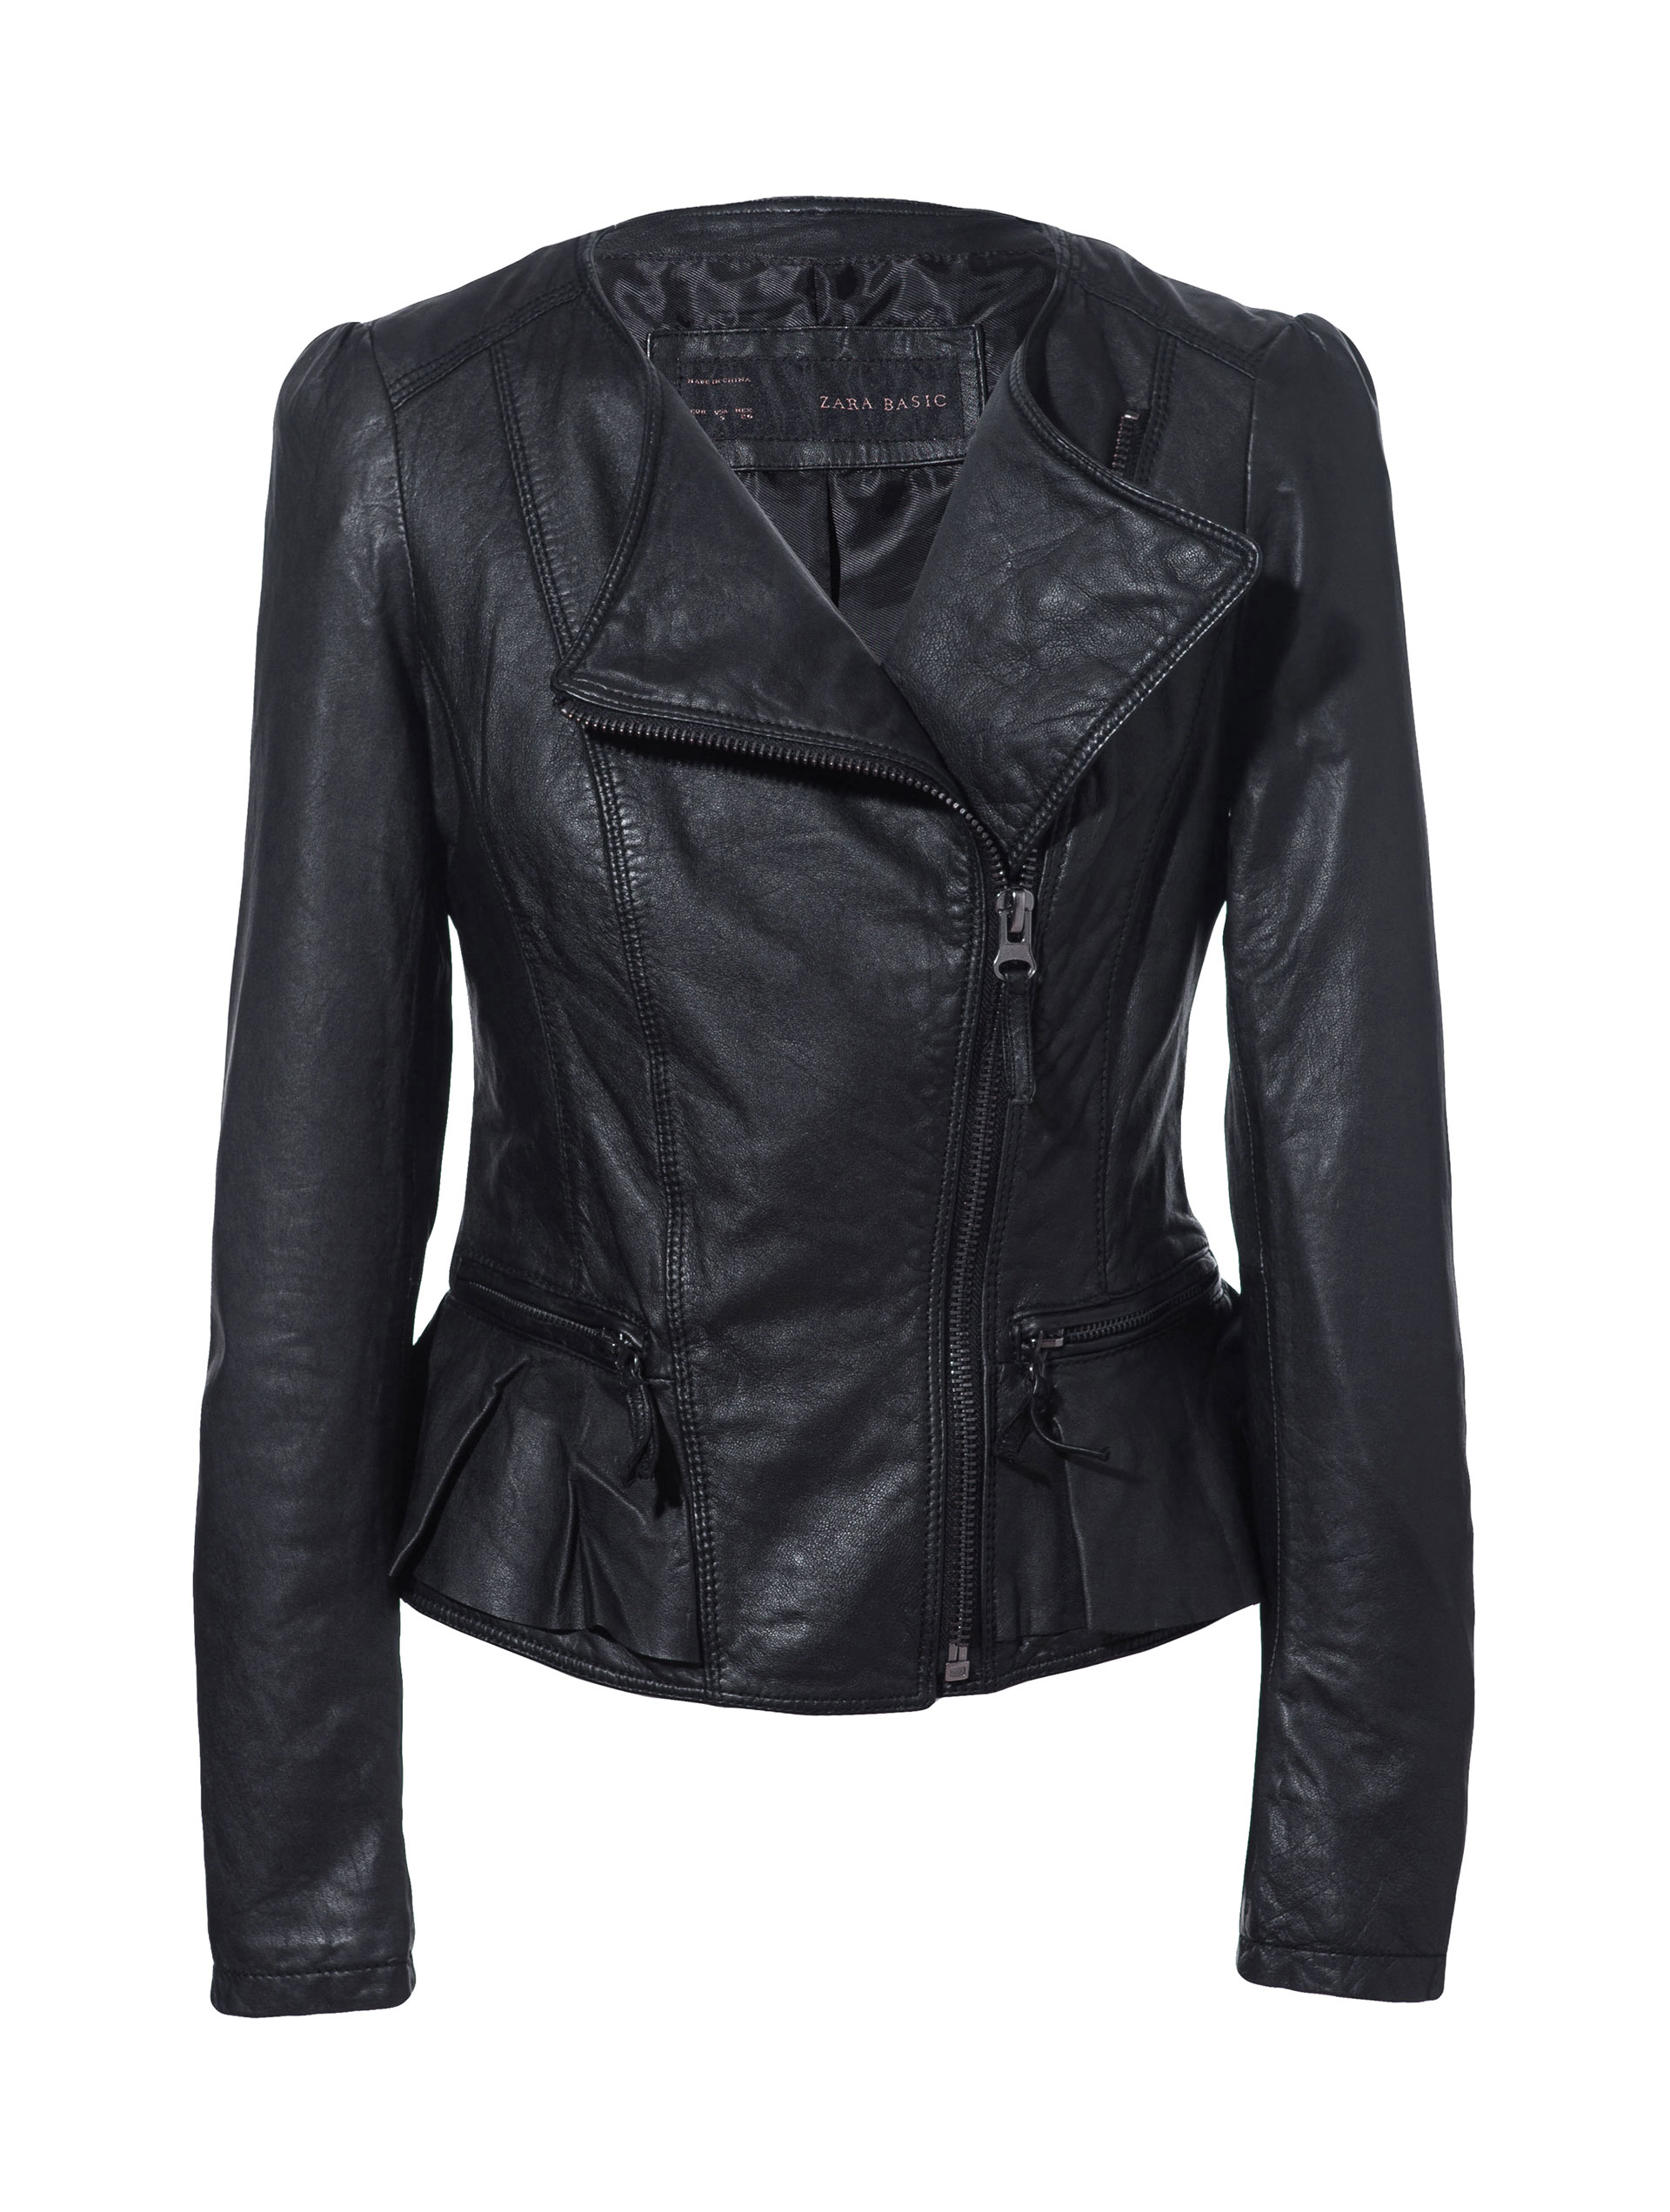 Zara Leather Jacket with Ruffle Detail in Black | Lyst